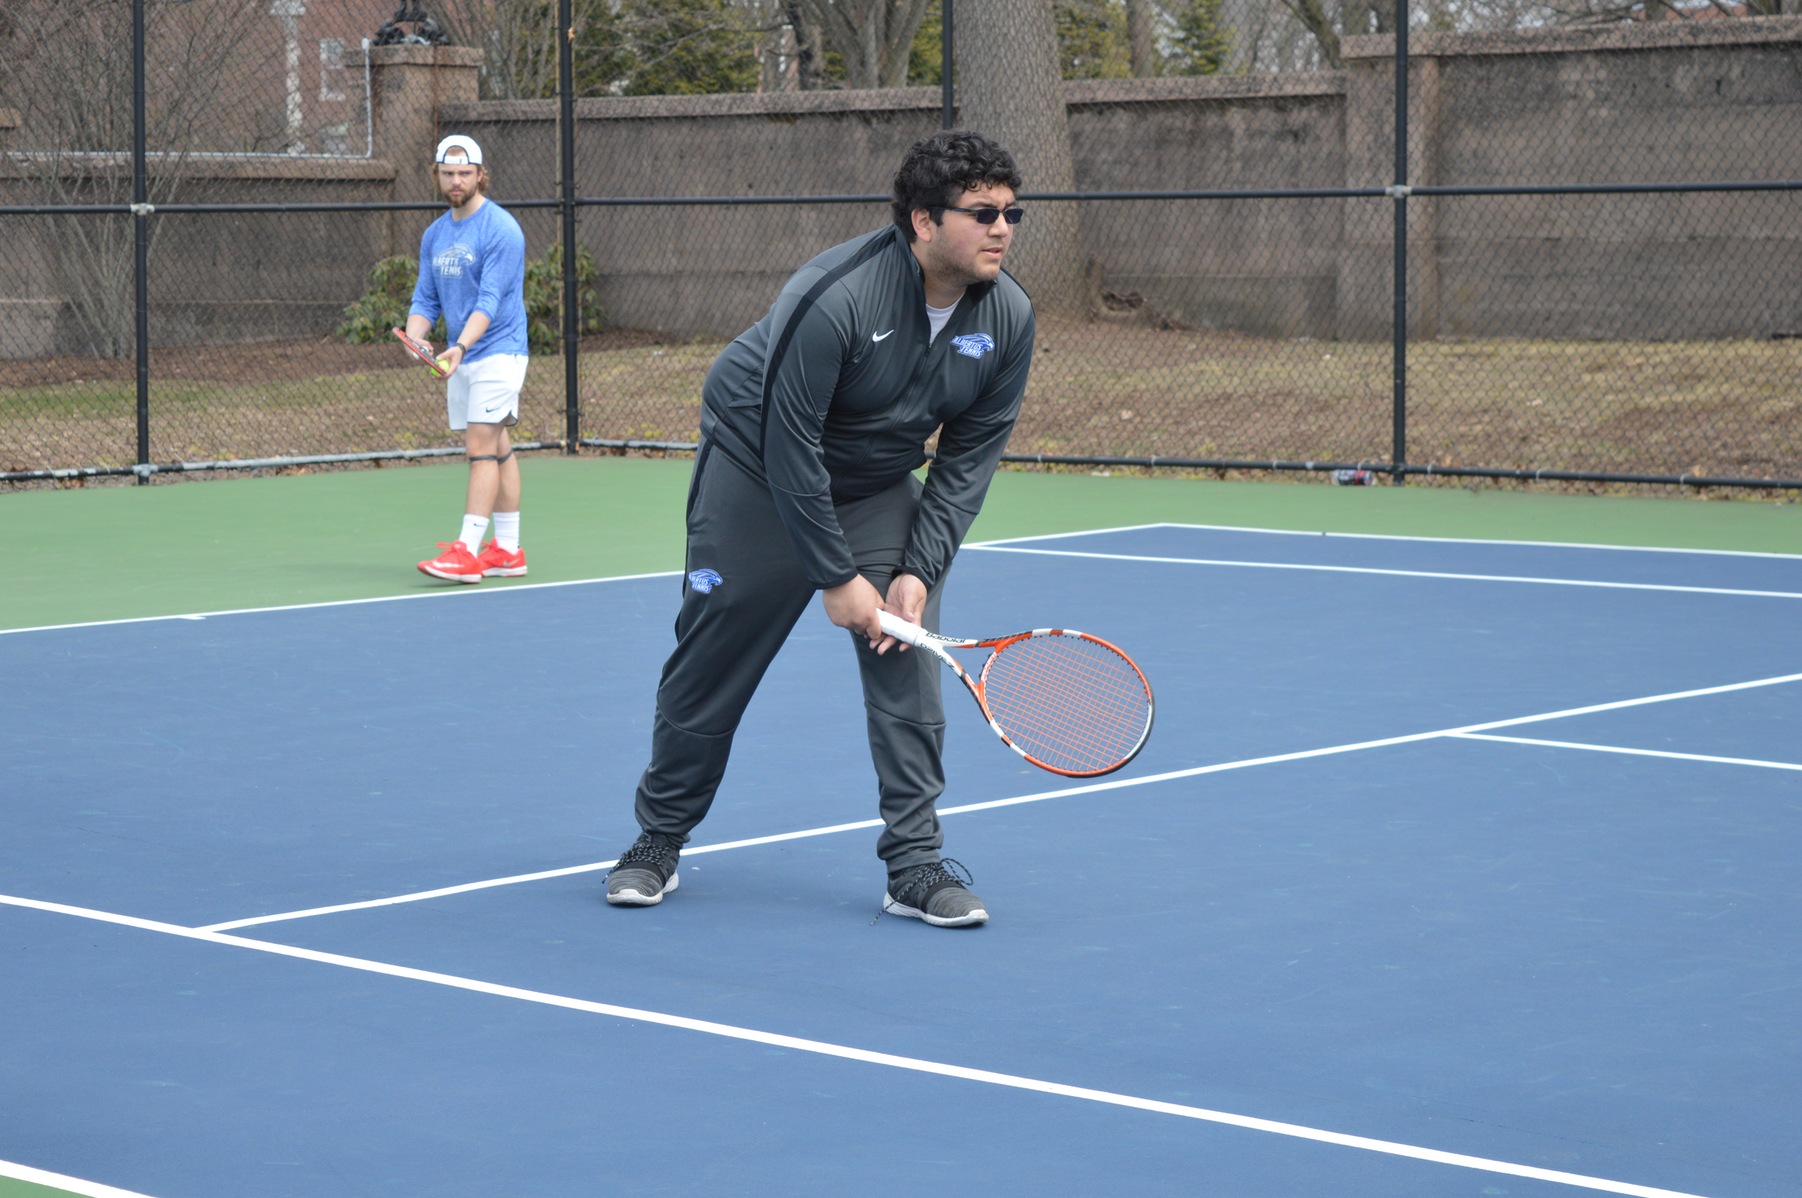 Men's Tennis Loses to Rutgers-Newark, 9-0, in Conference Play